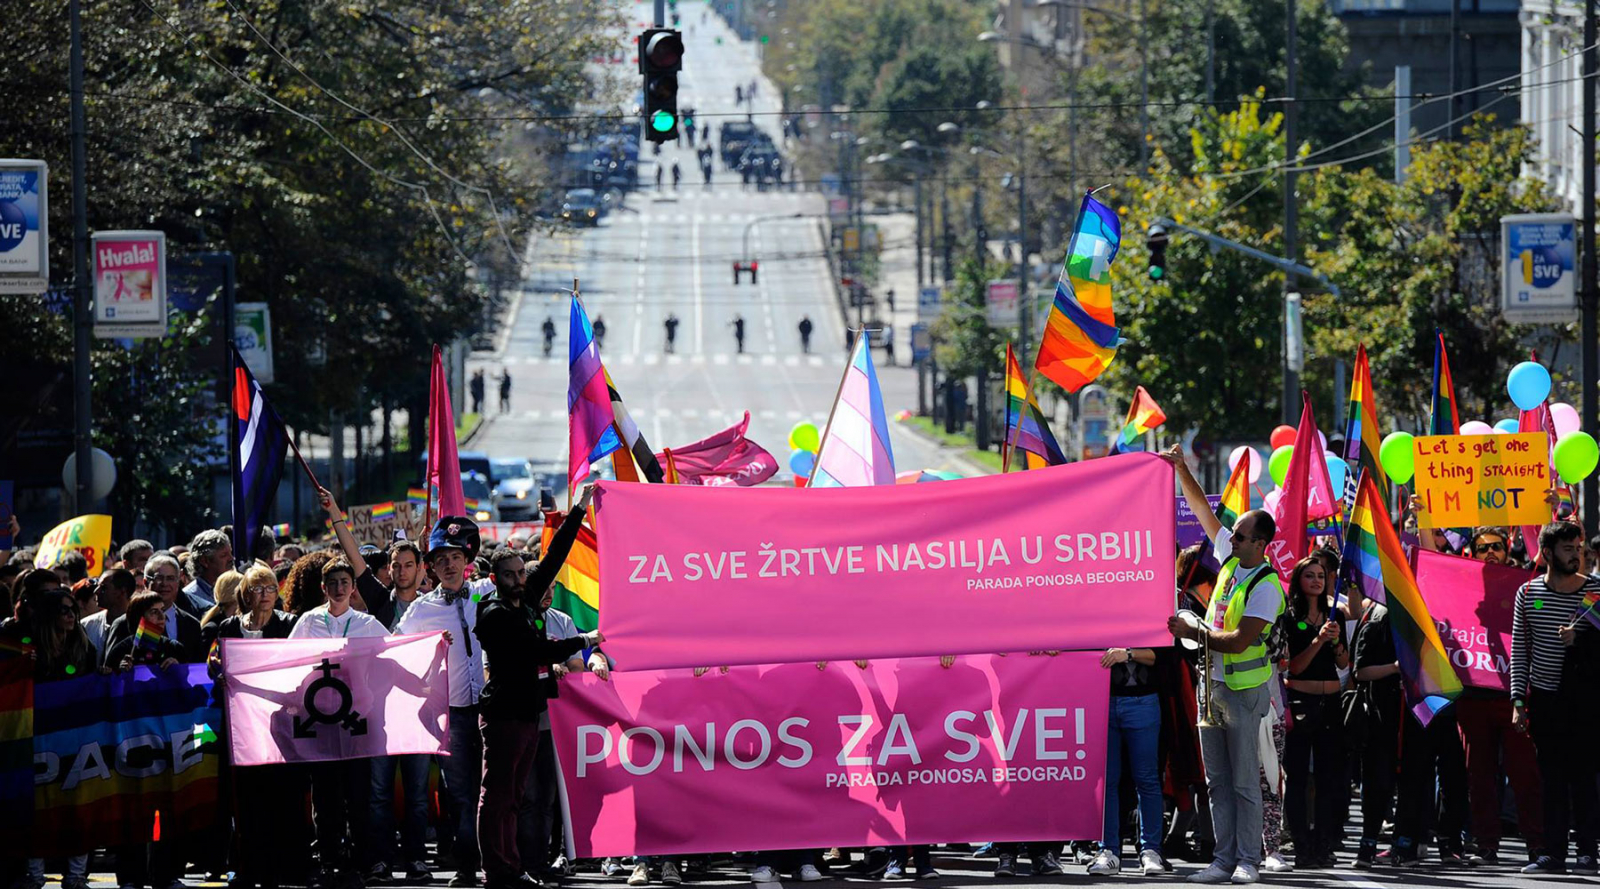 NDI Poll on LGBTI Issues in the Balkans is a Call to Action